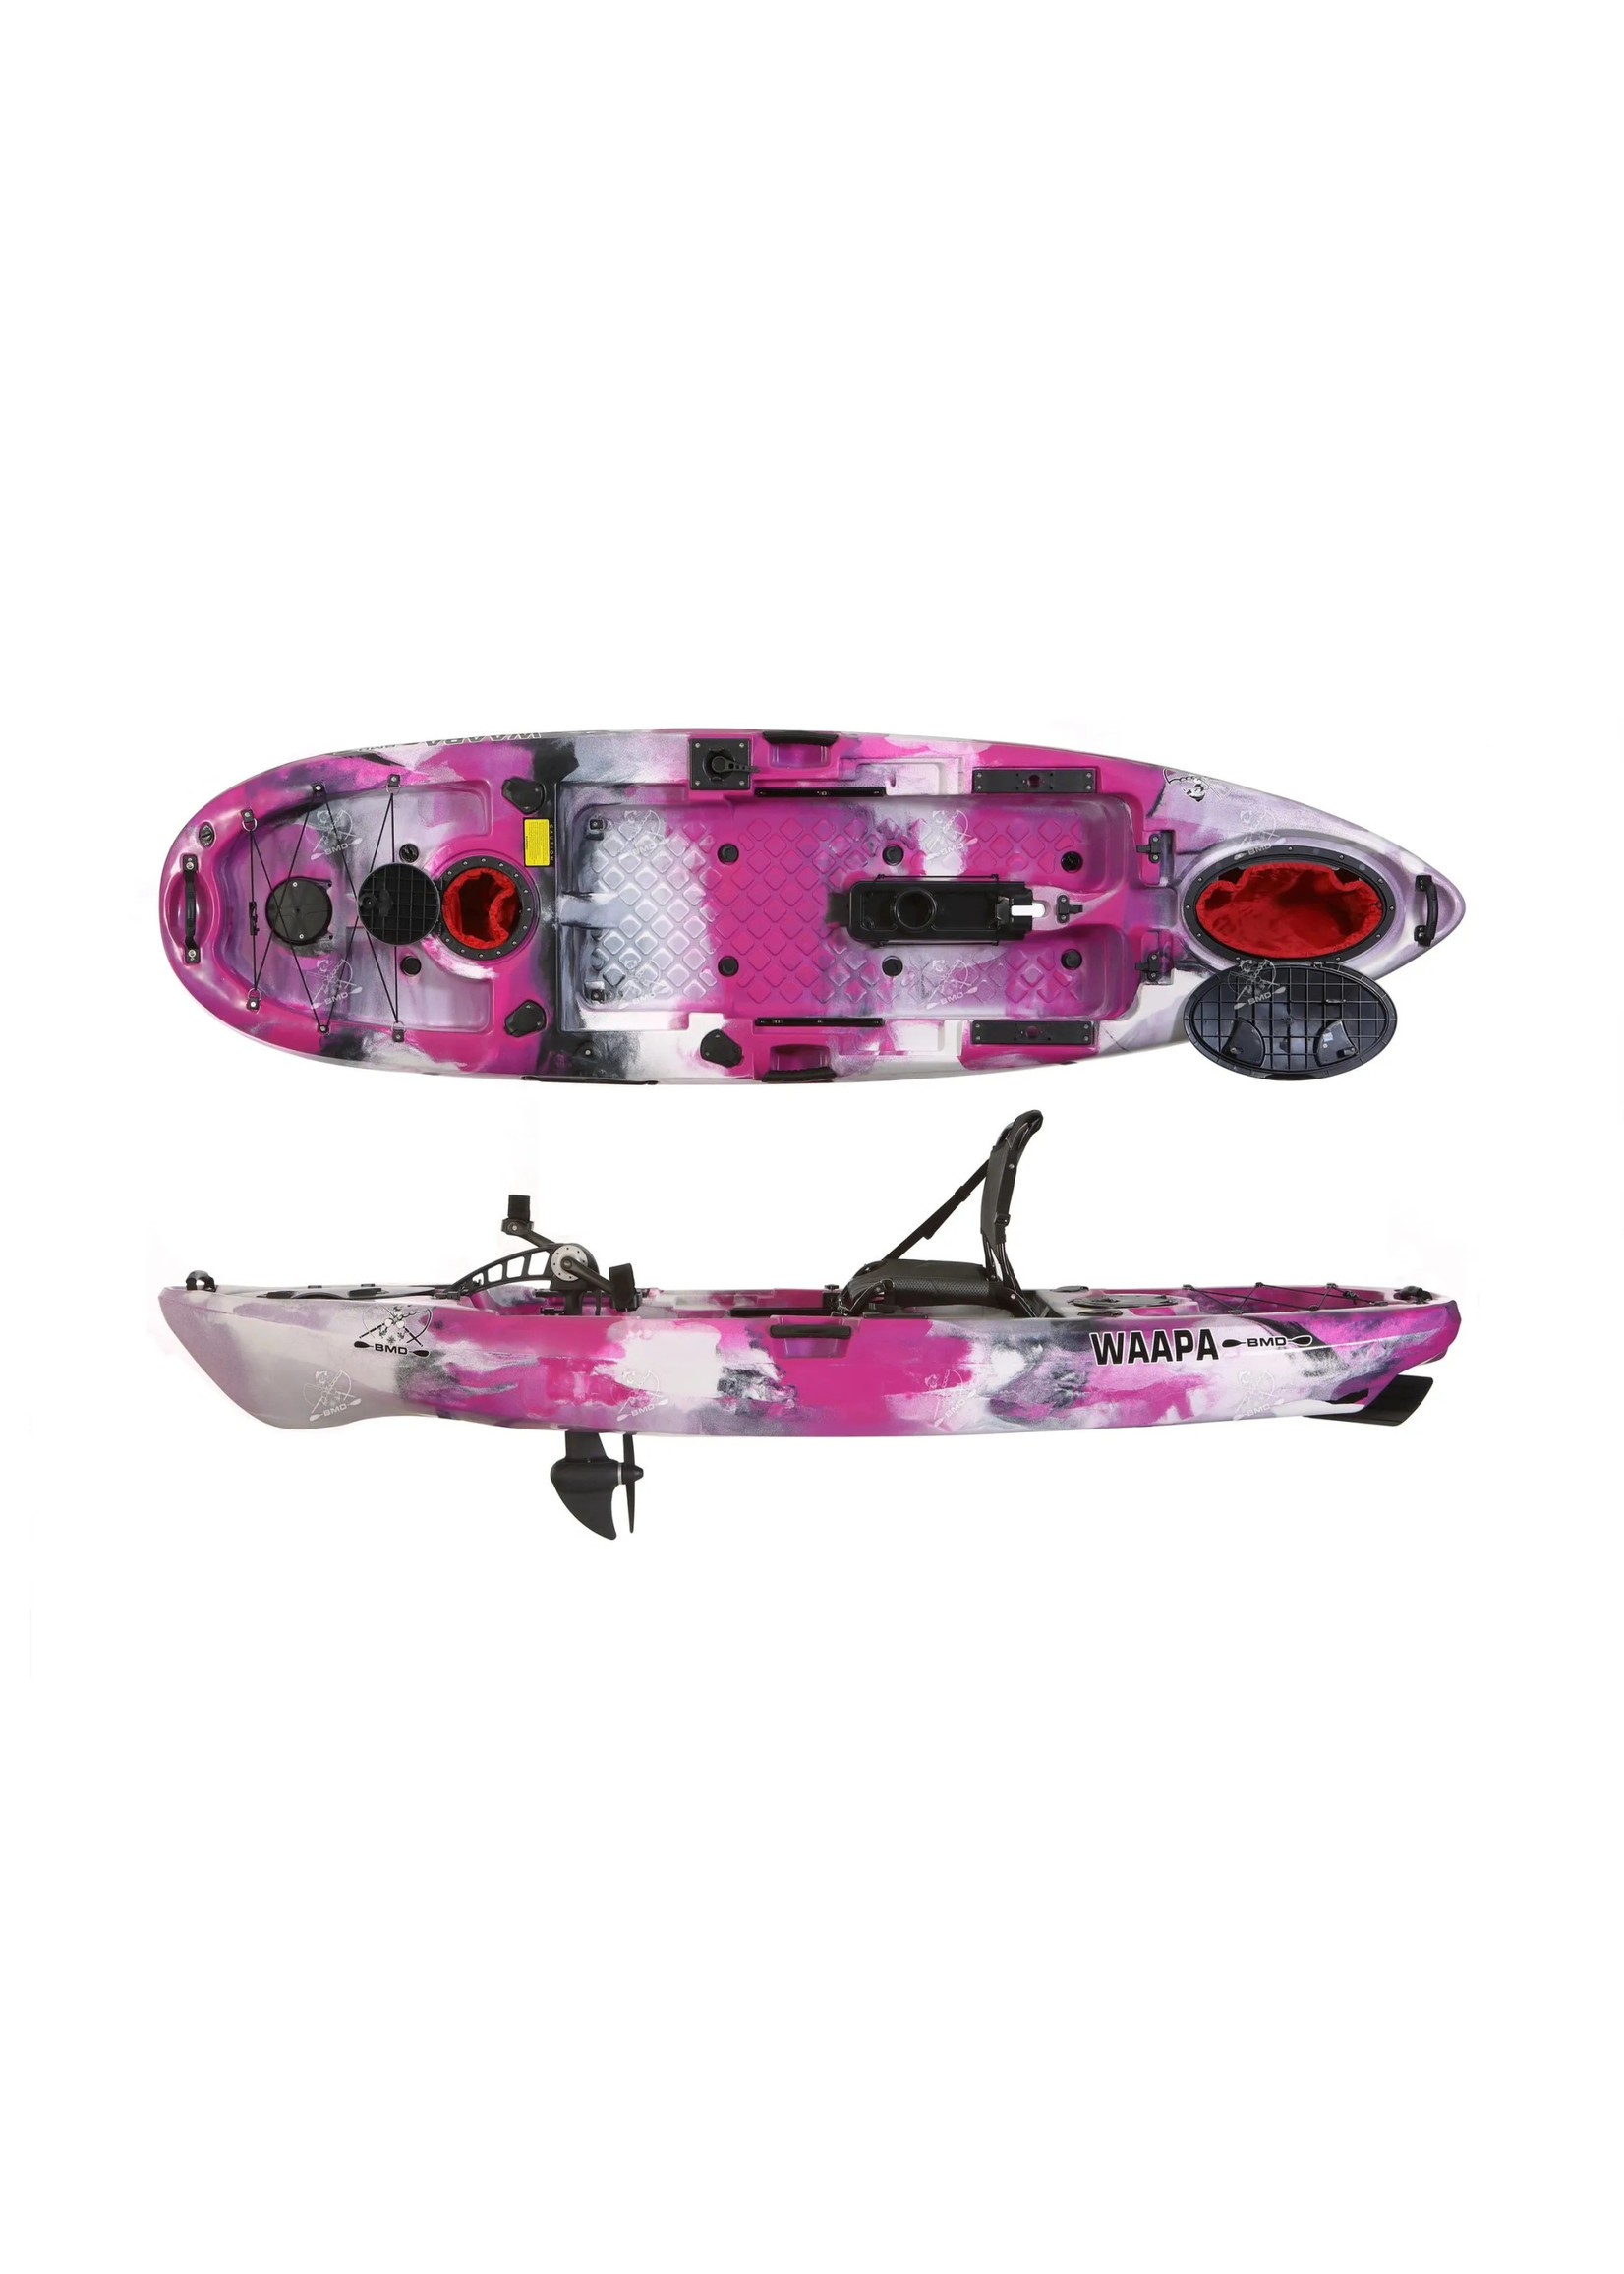 Waapa Fishing kayak with pedals - pink black and white